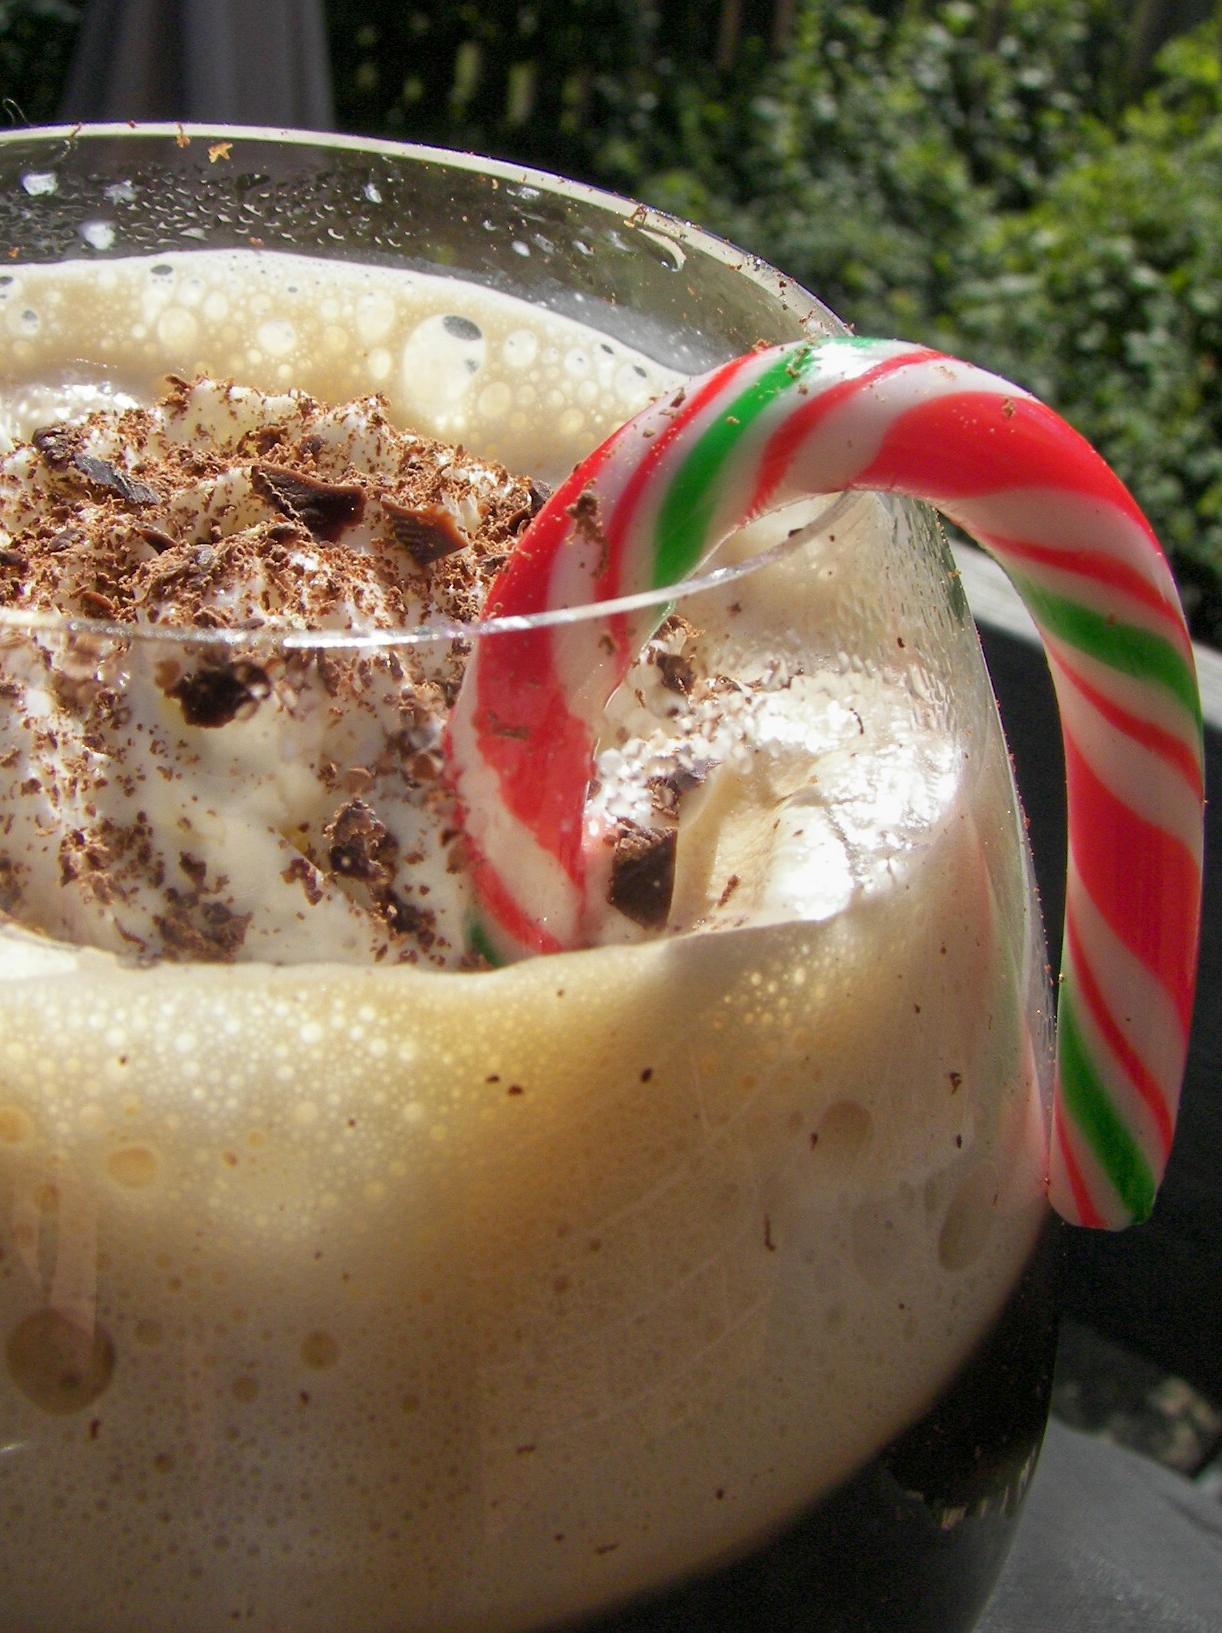  Get ready to add some holiday cheer to your coffee!